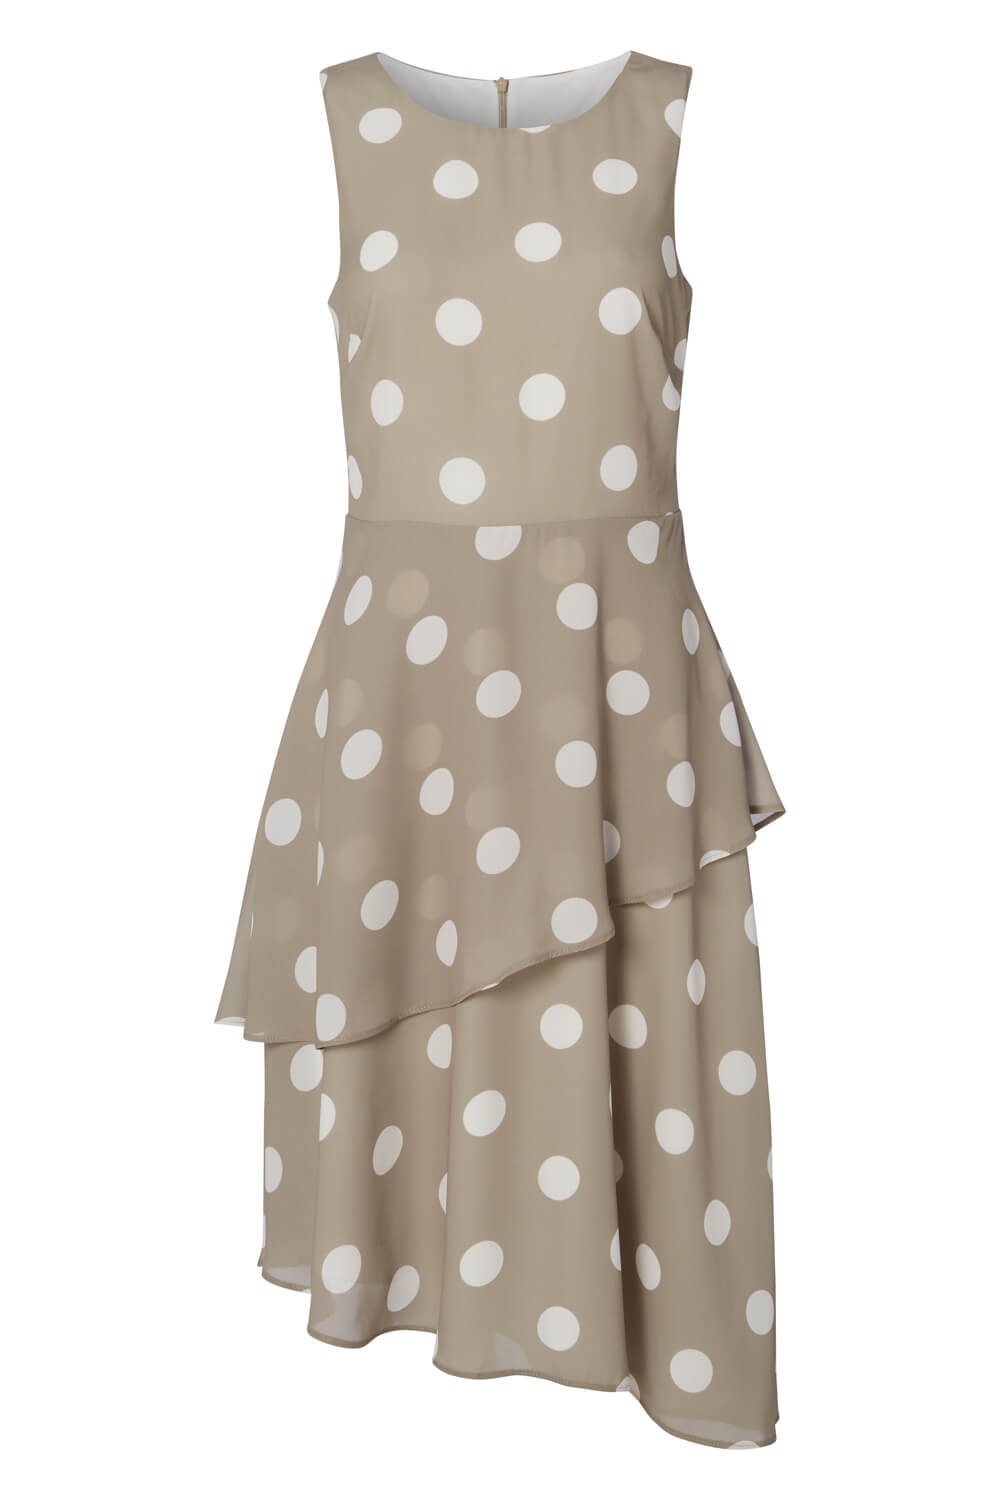 Mink Spot Print Fit and Flare Dress, Image 3 of 3